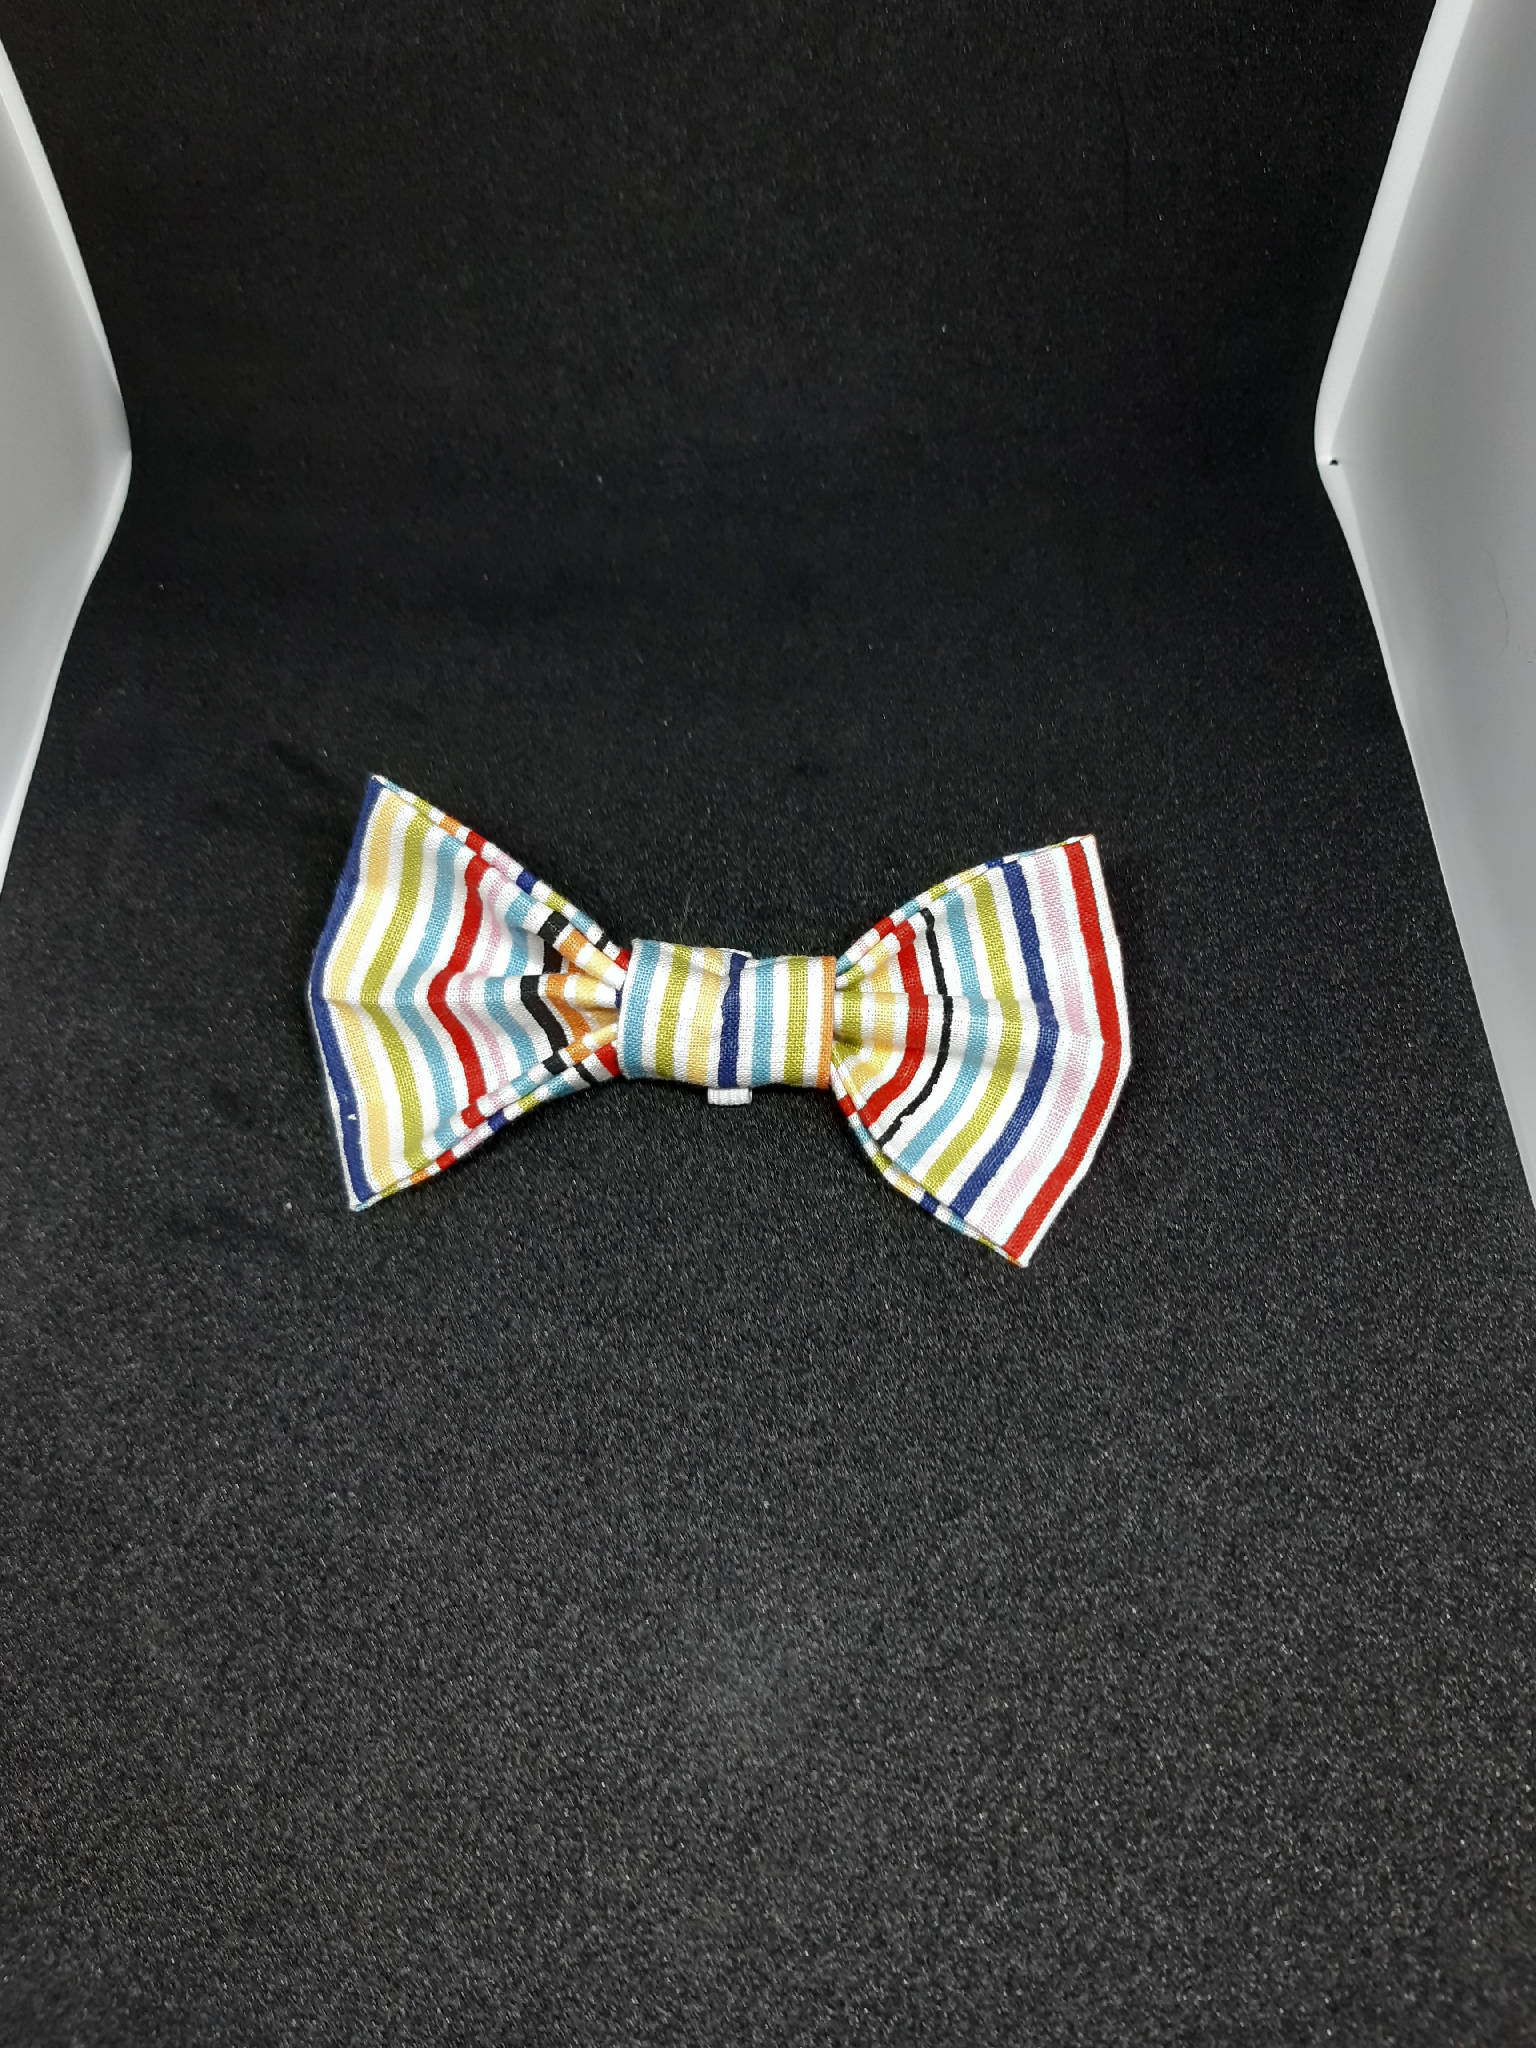 large single bowties for your pets